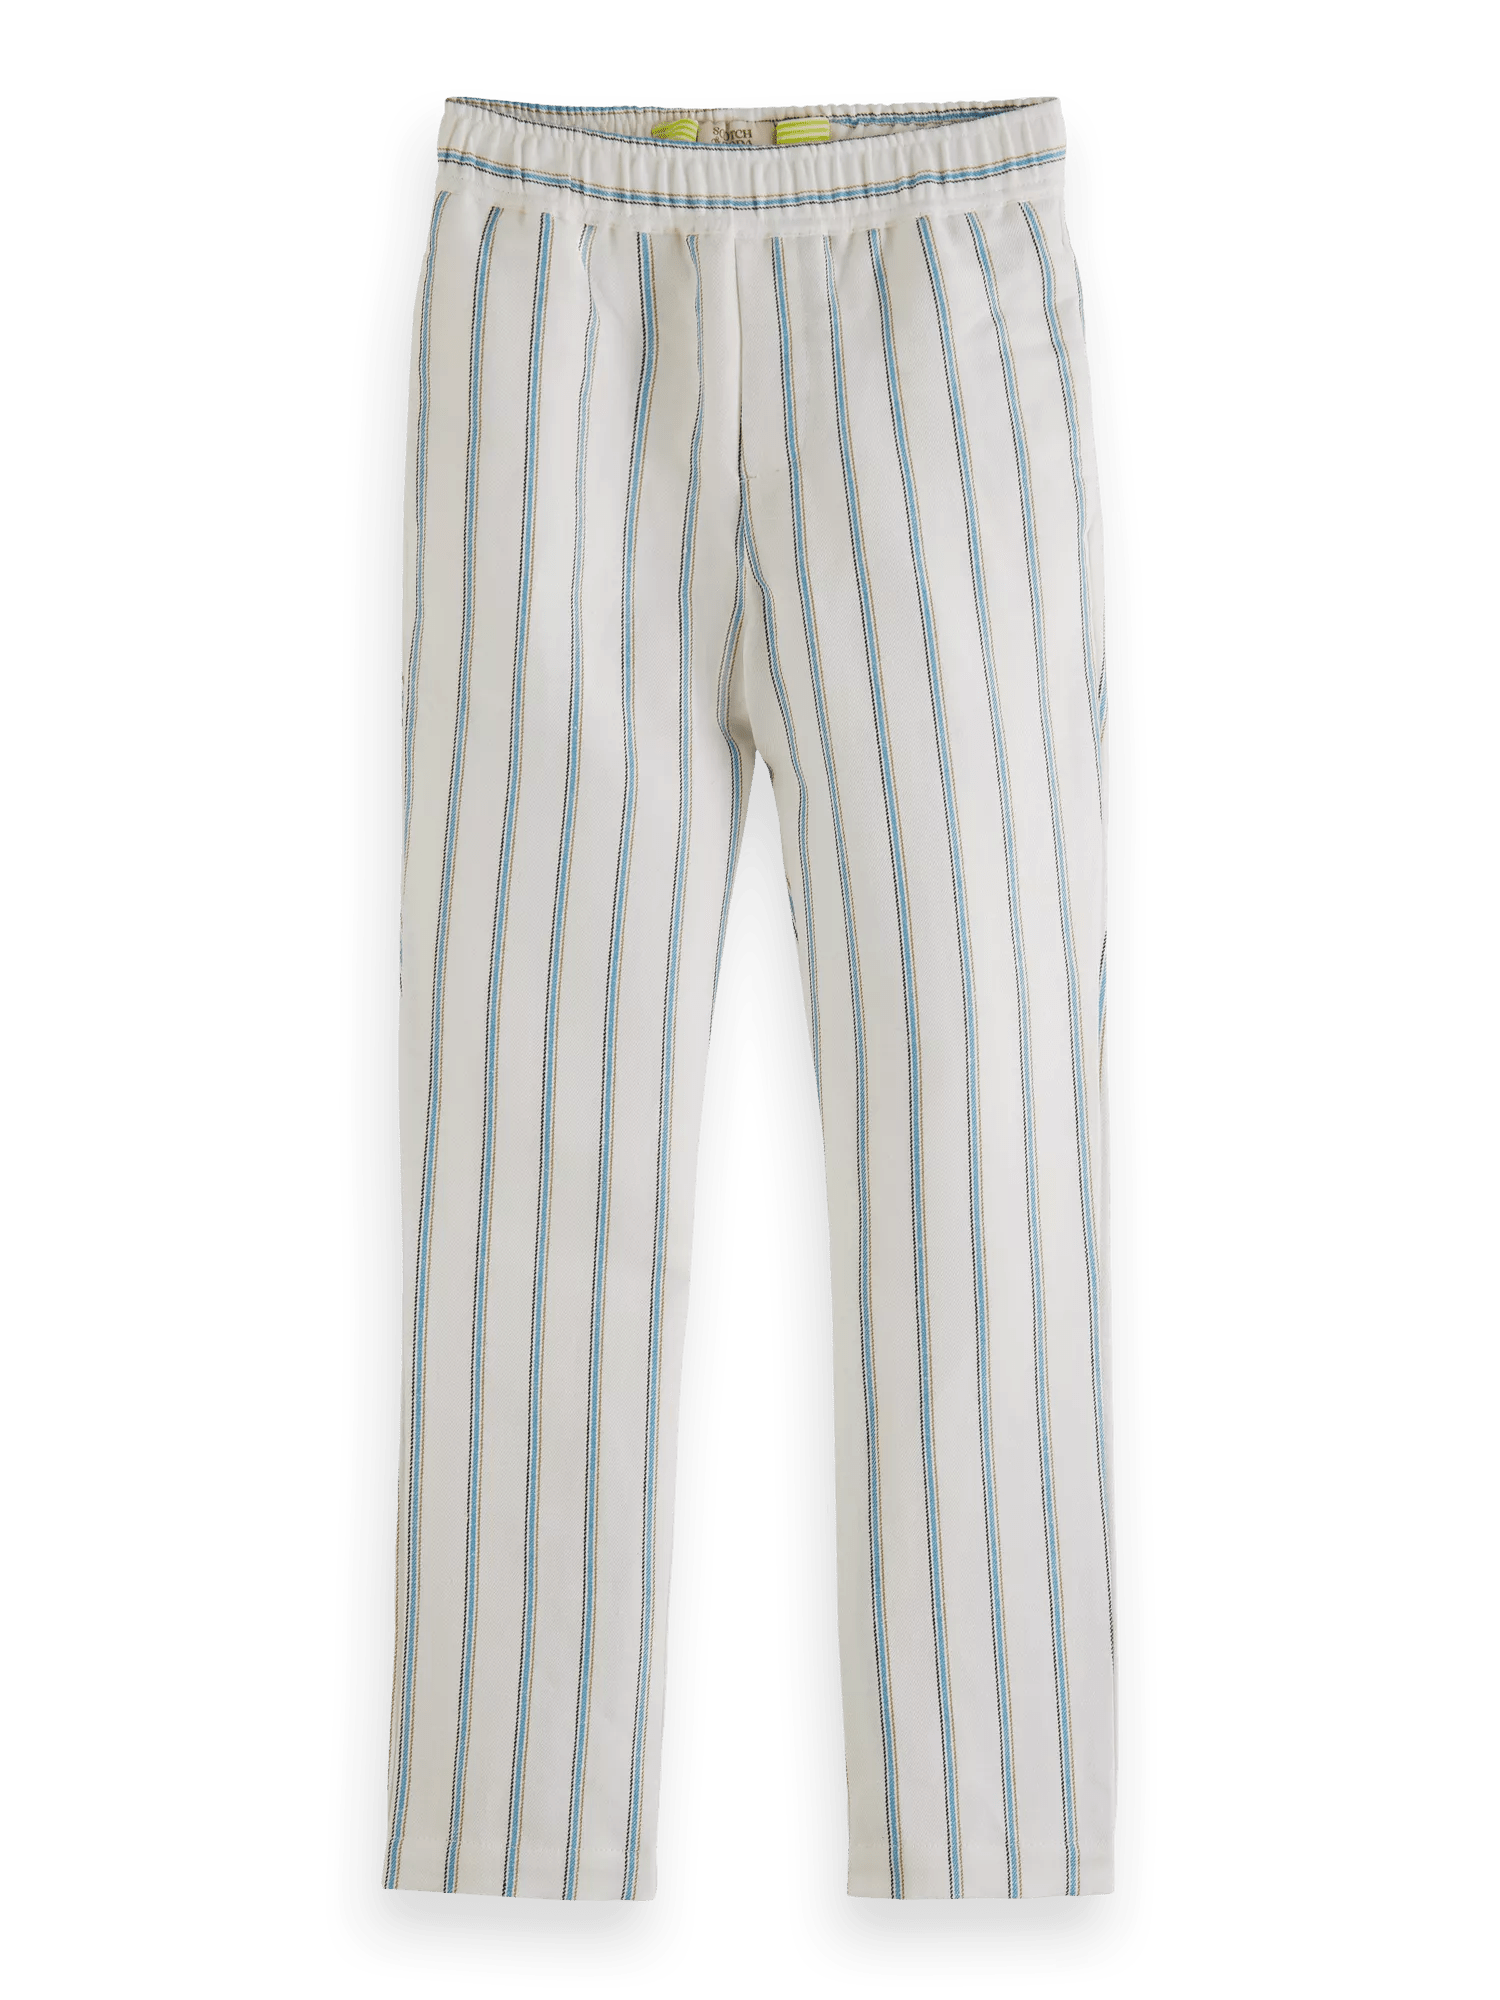 Scotch & Soda Hose im Relaxed Tapered Fit aus Leinenmischung FNT